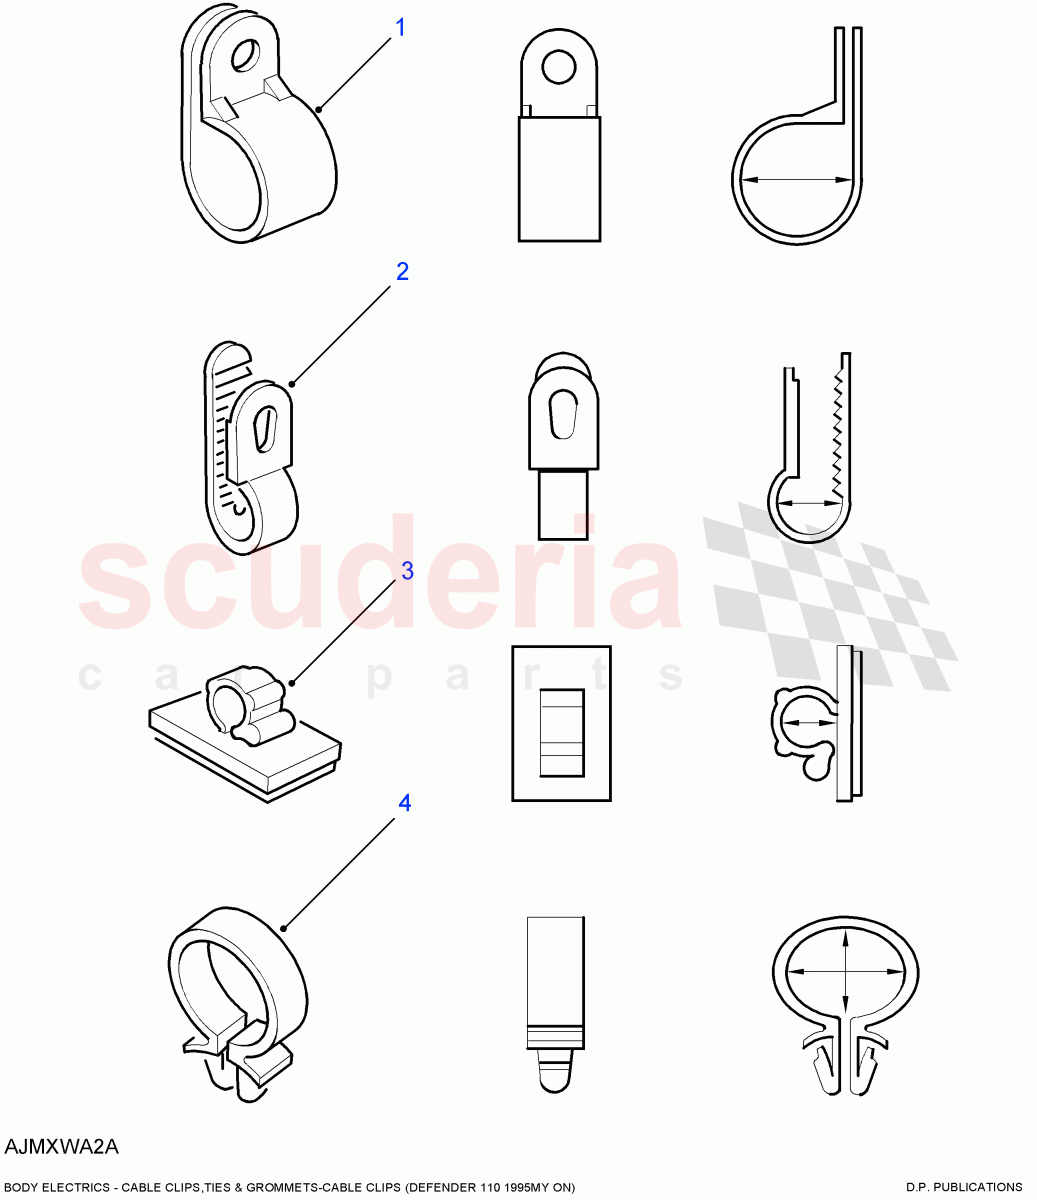 Cable Clips((V)FROM7A000001) of Land Rover Land Rover Defender (2007-2016)